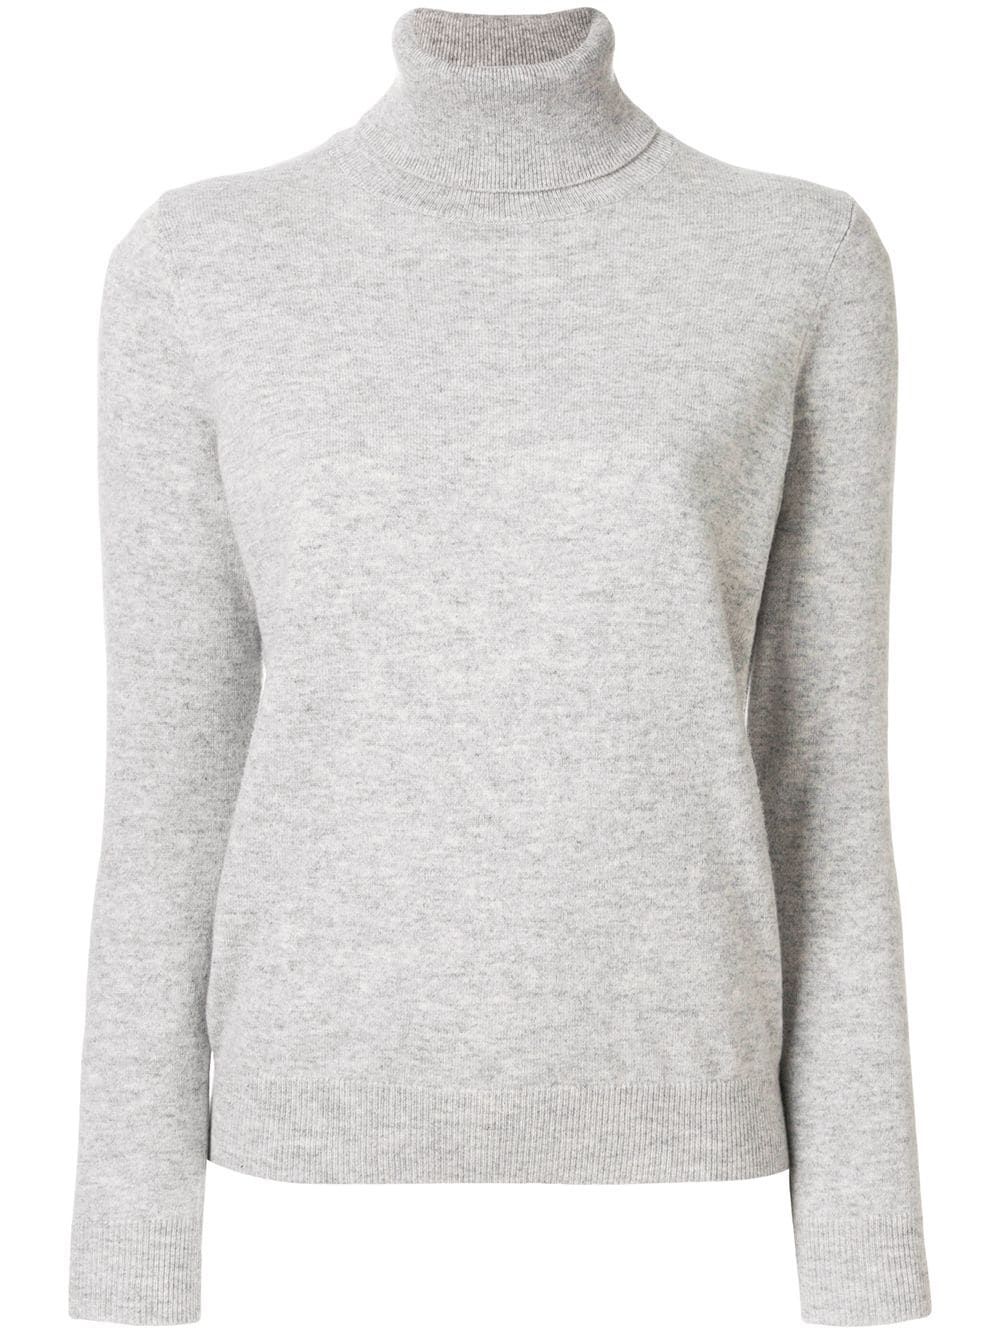 N.Peal cashmere polo neck sweater - Grey | FarFetch US